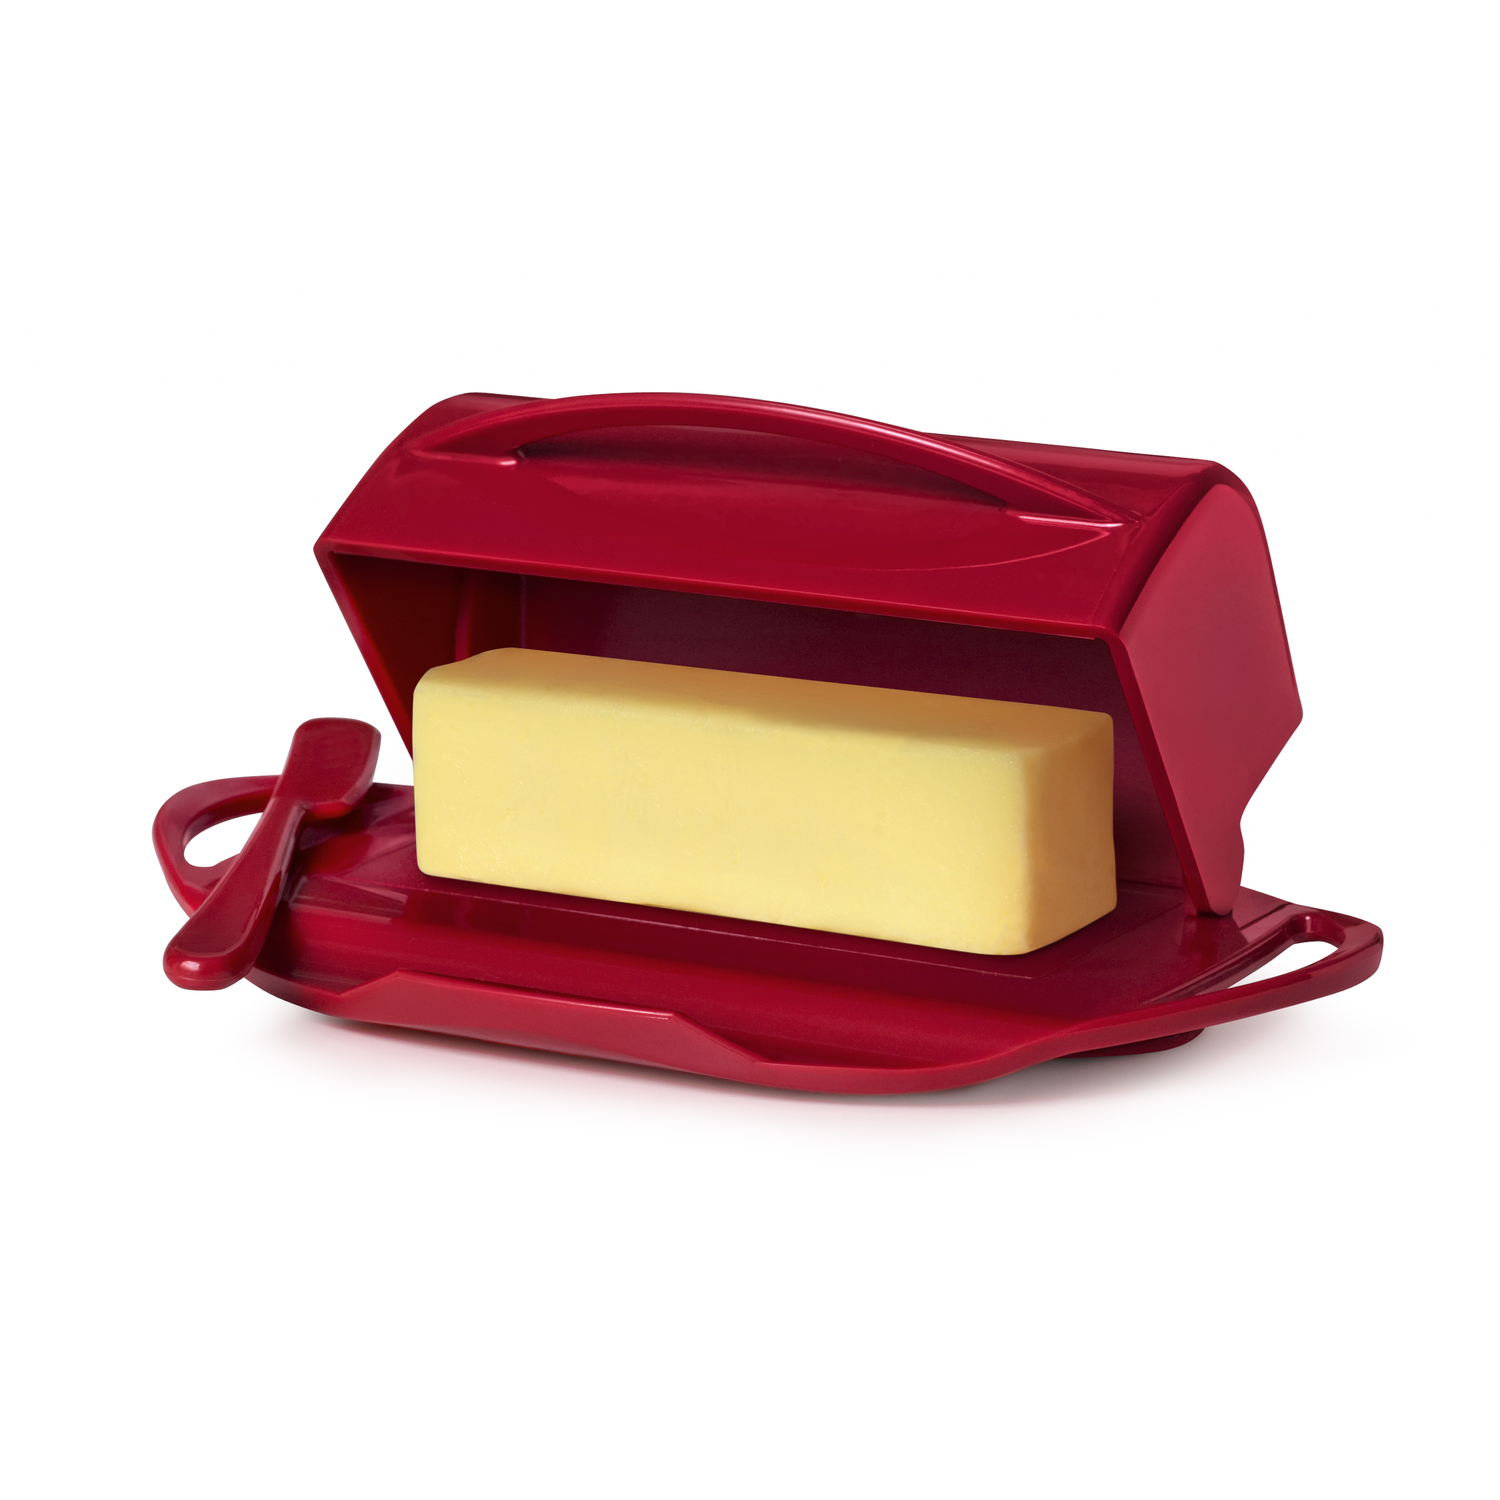 UPC 853969006015 product image for Butterie 5.5 in. W x 9 in. L Red Butter Dish | upcitemdb.com